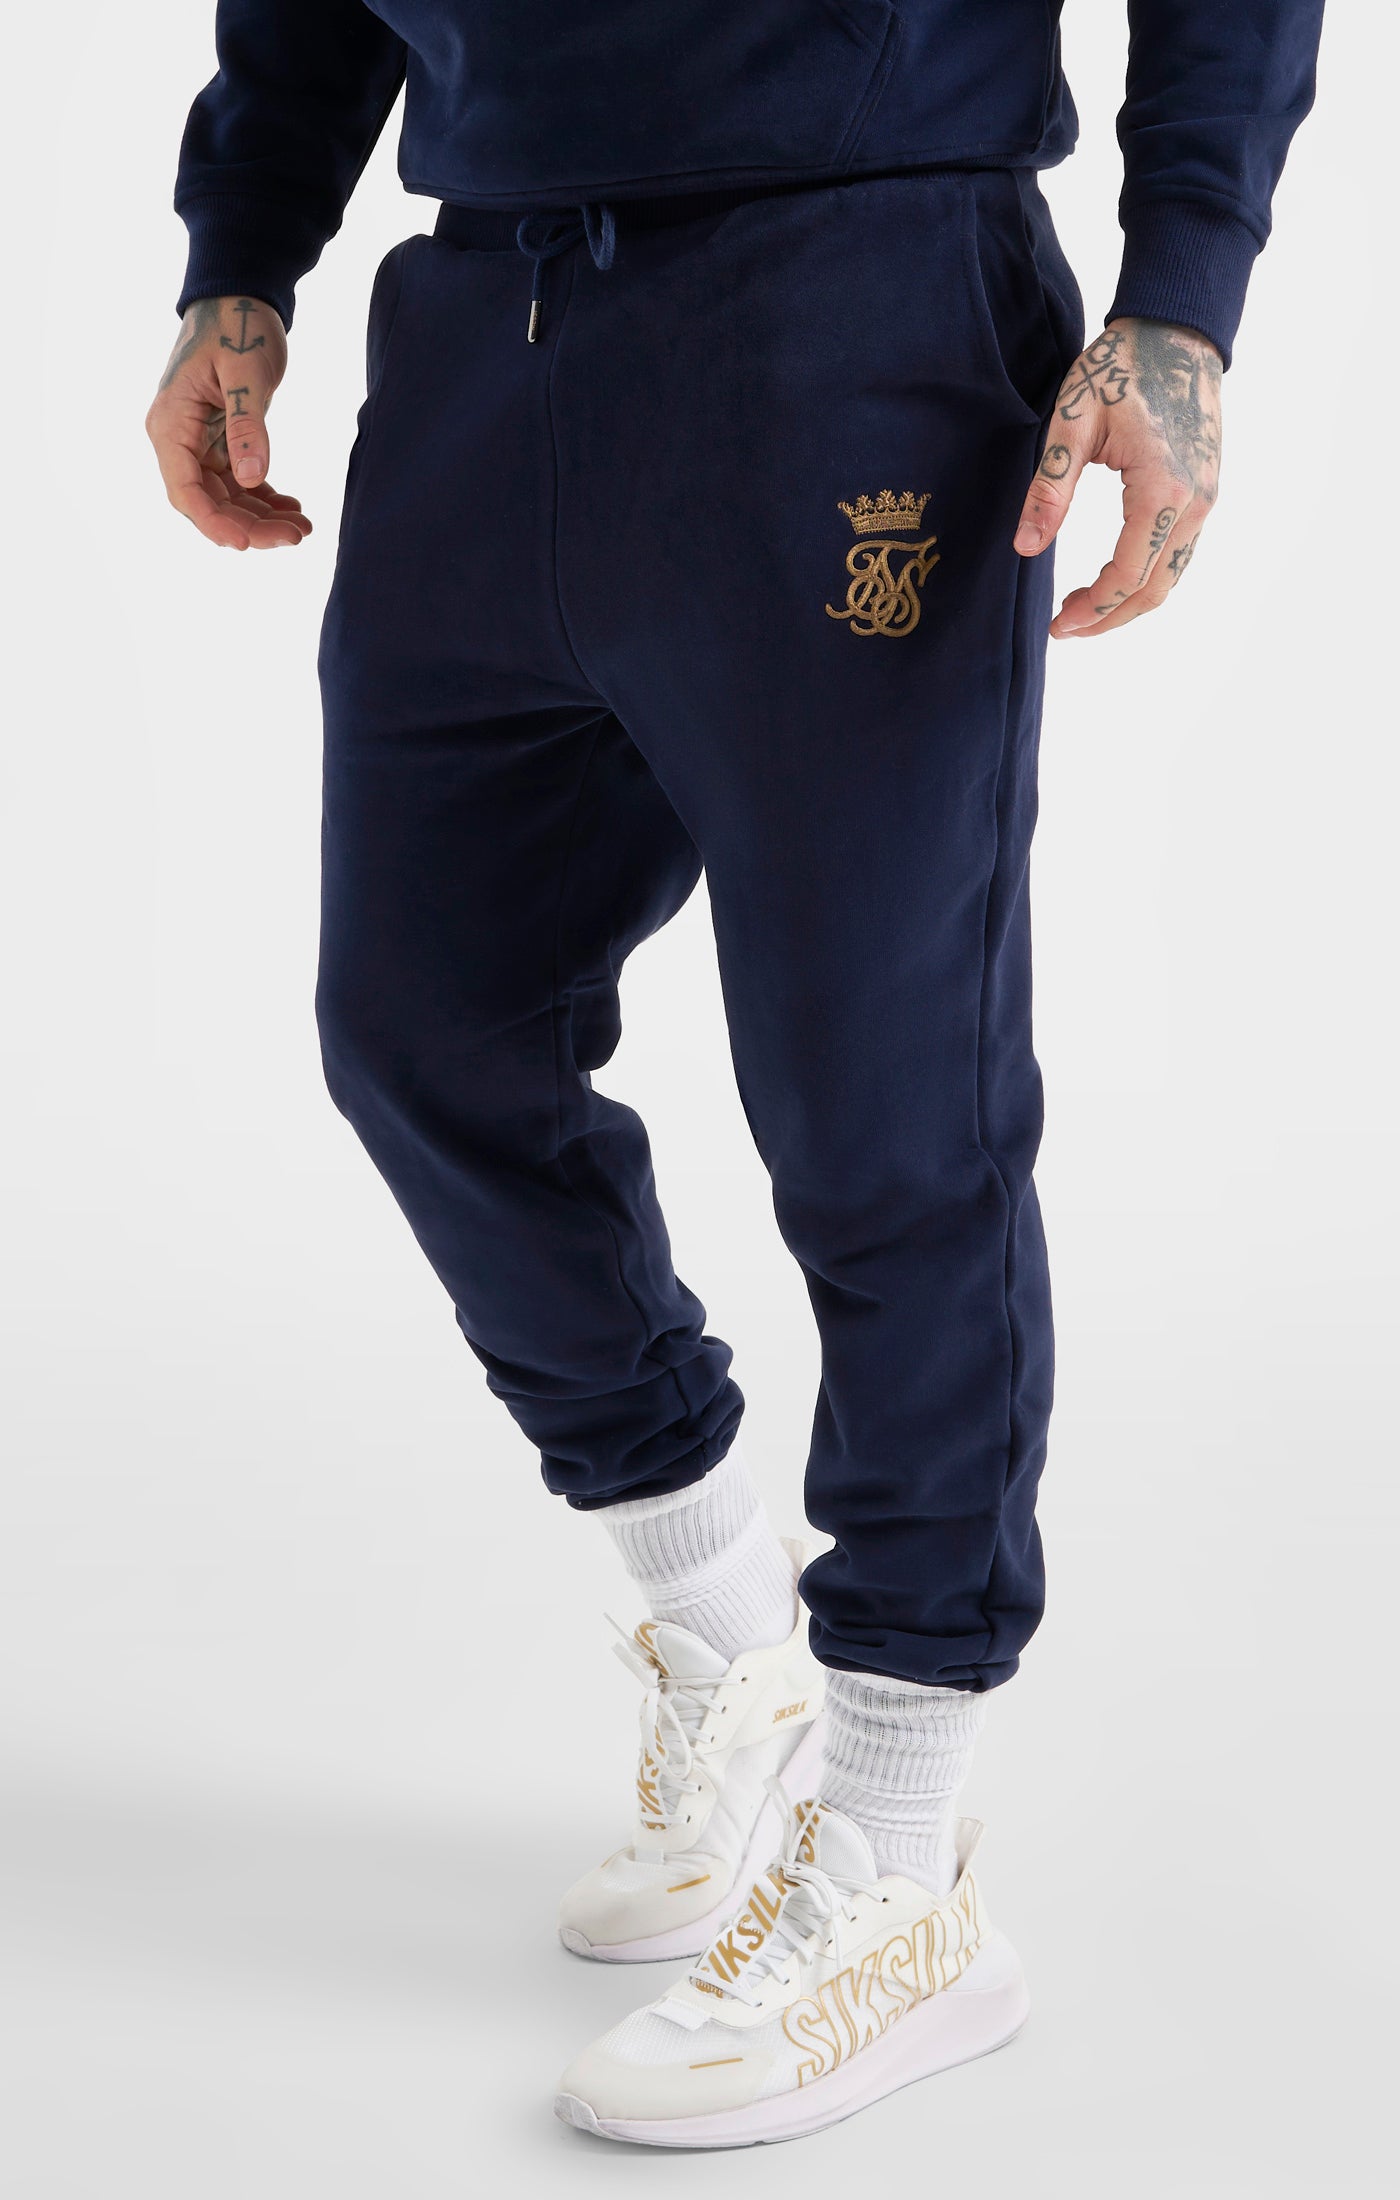 Load image into Gallery viewer, Messi x SikSilk Navy Fleece Pant